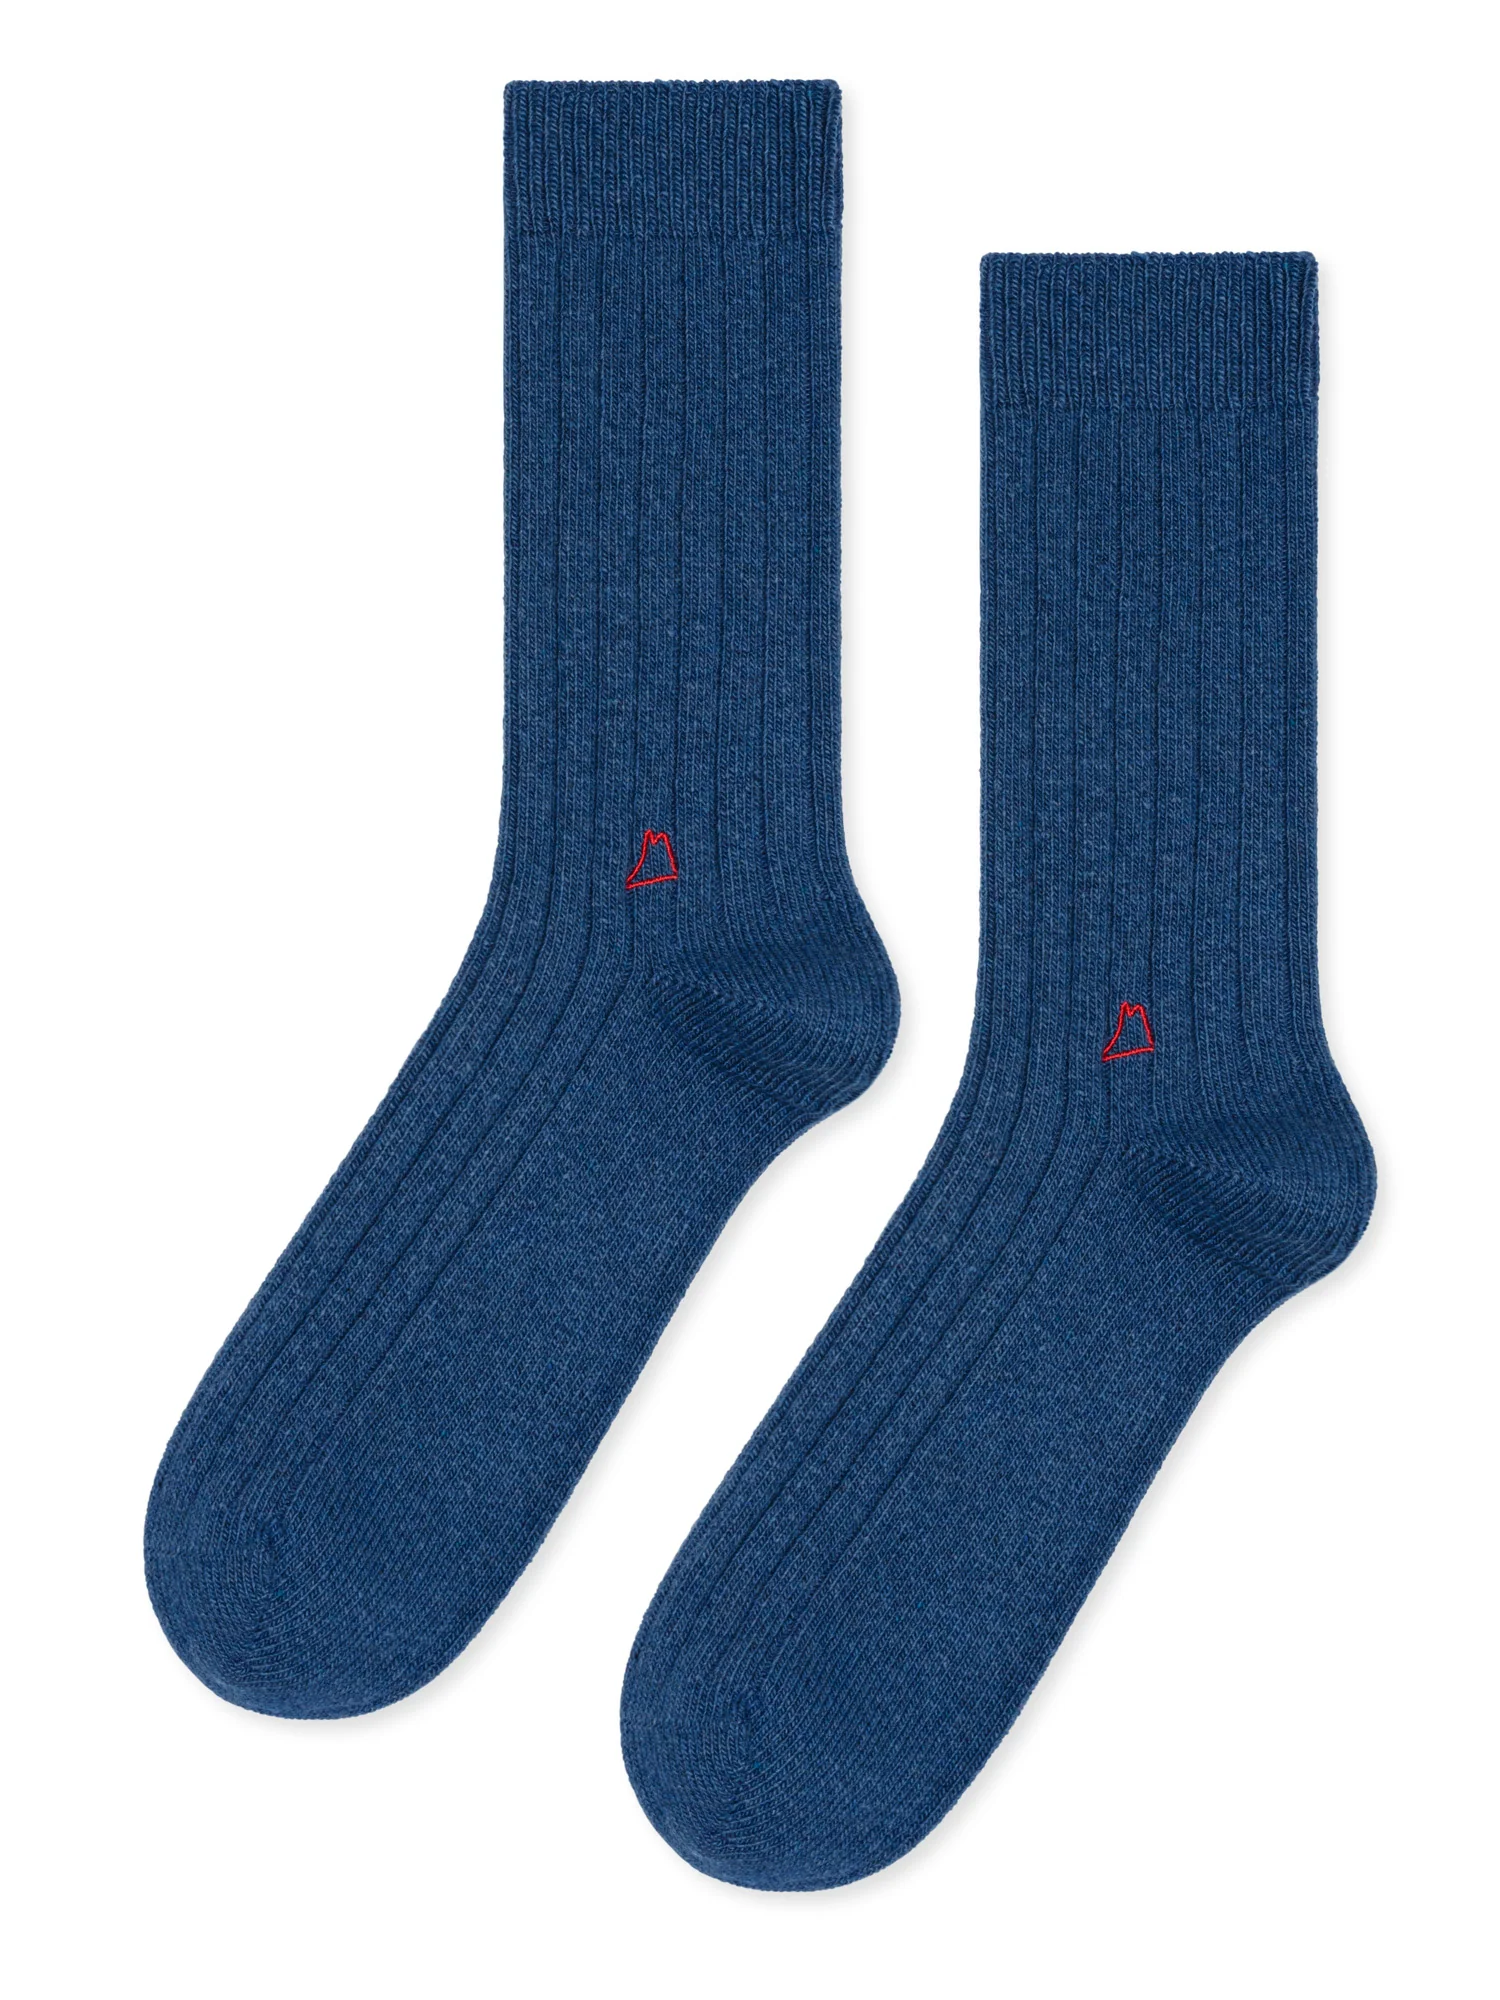 blue cashmere socks against a white background. 